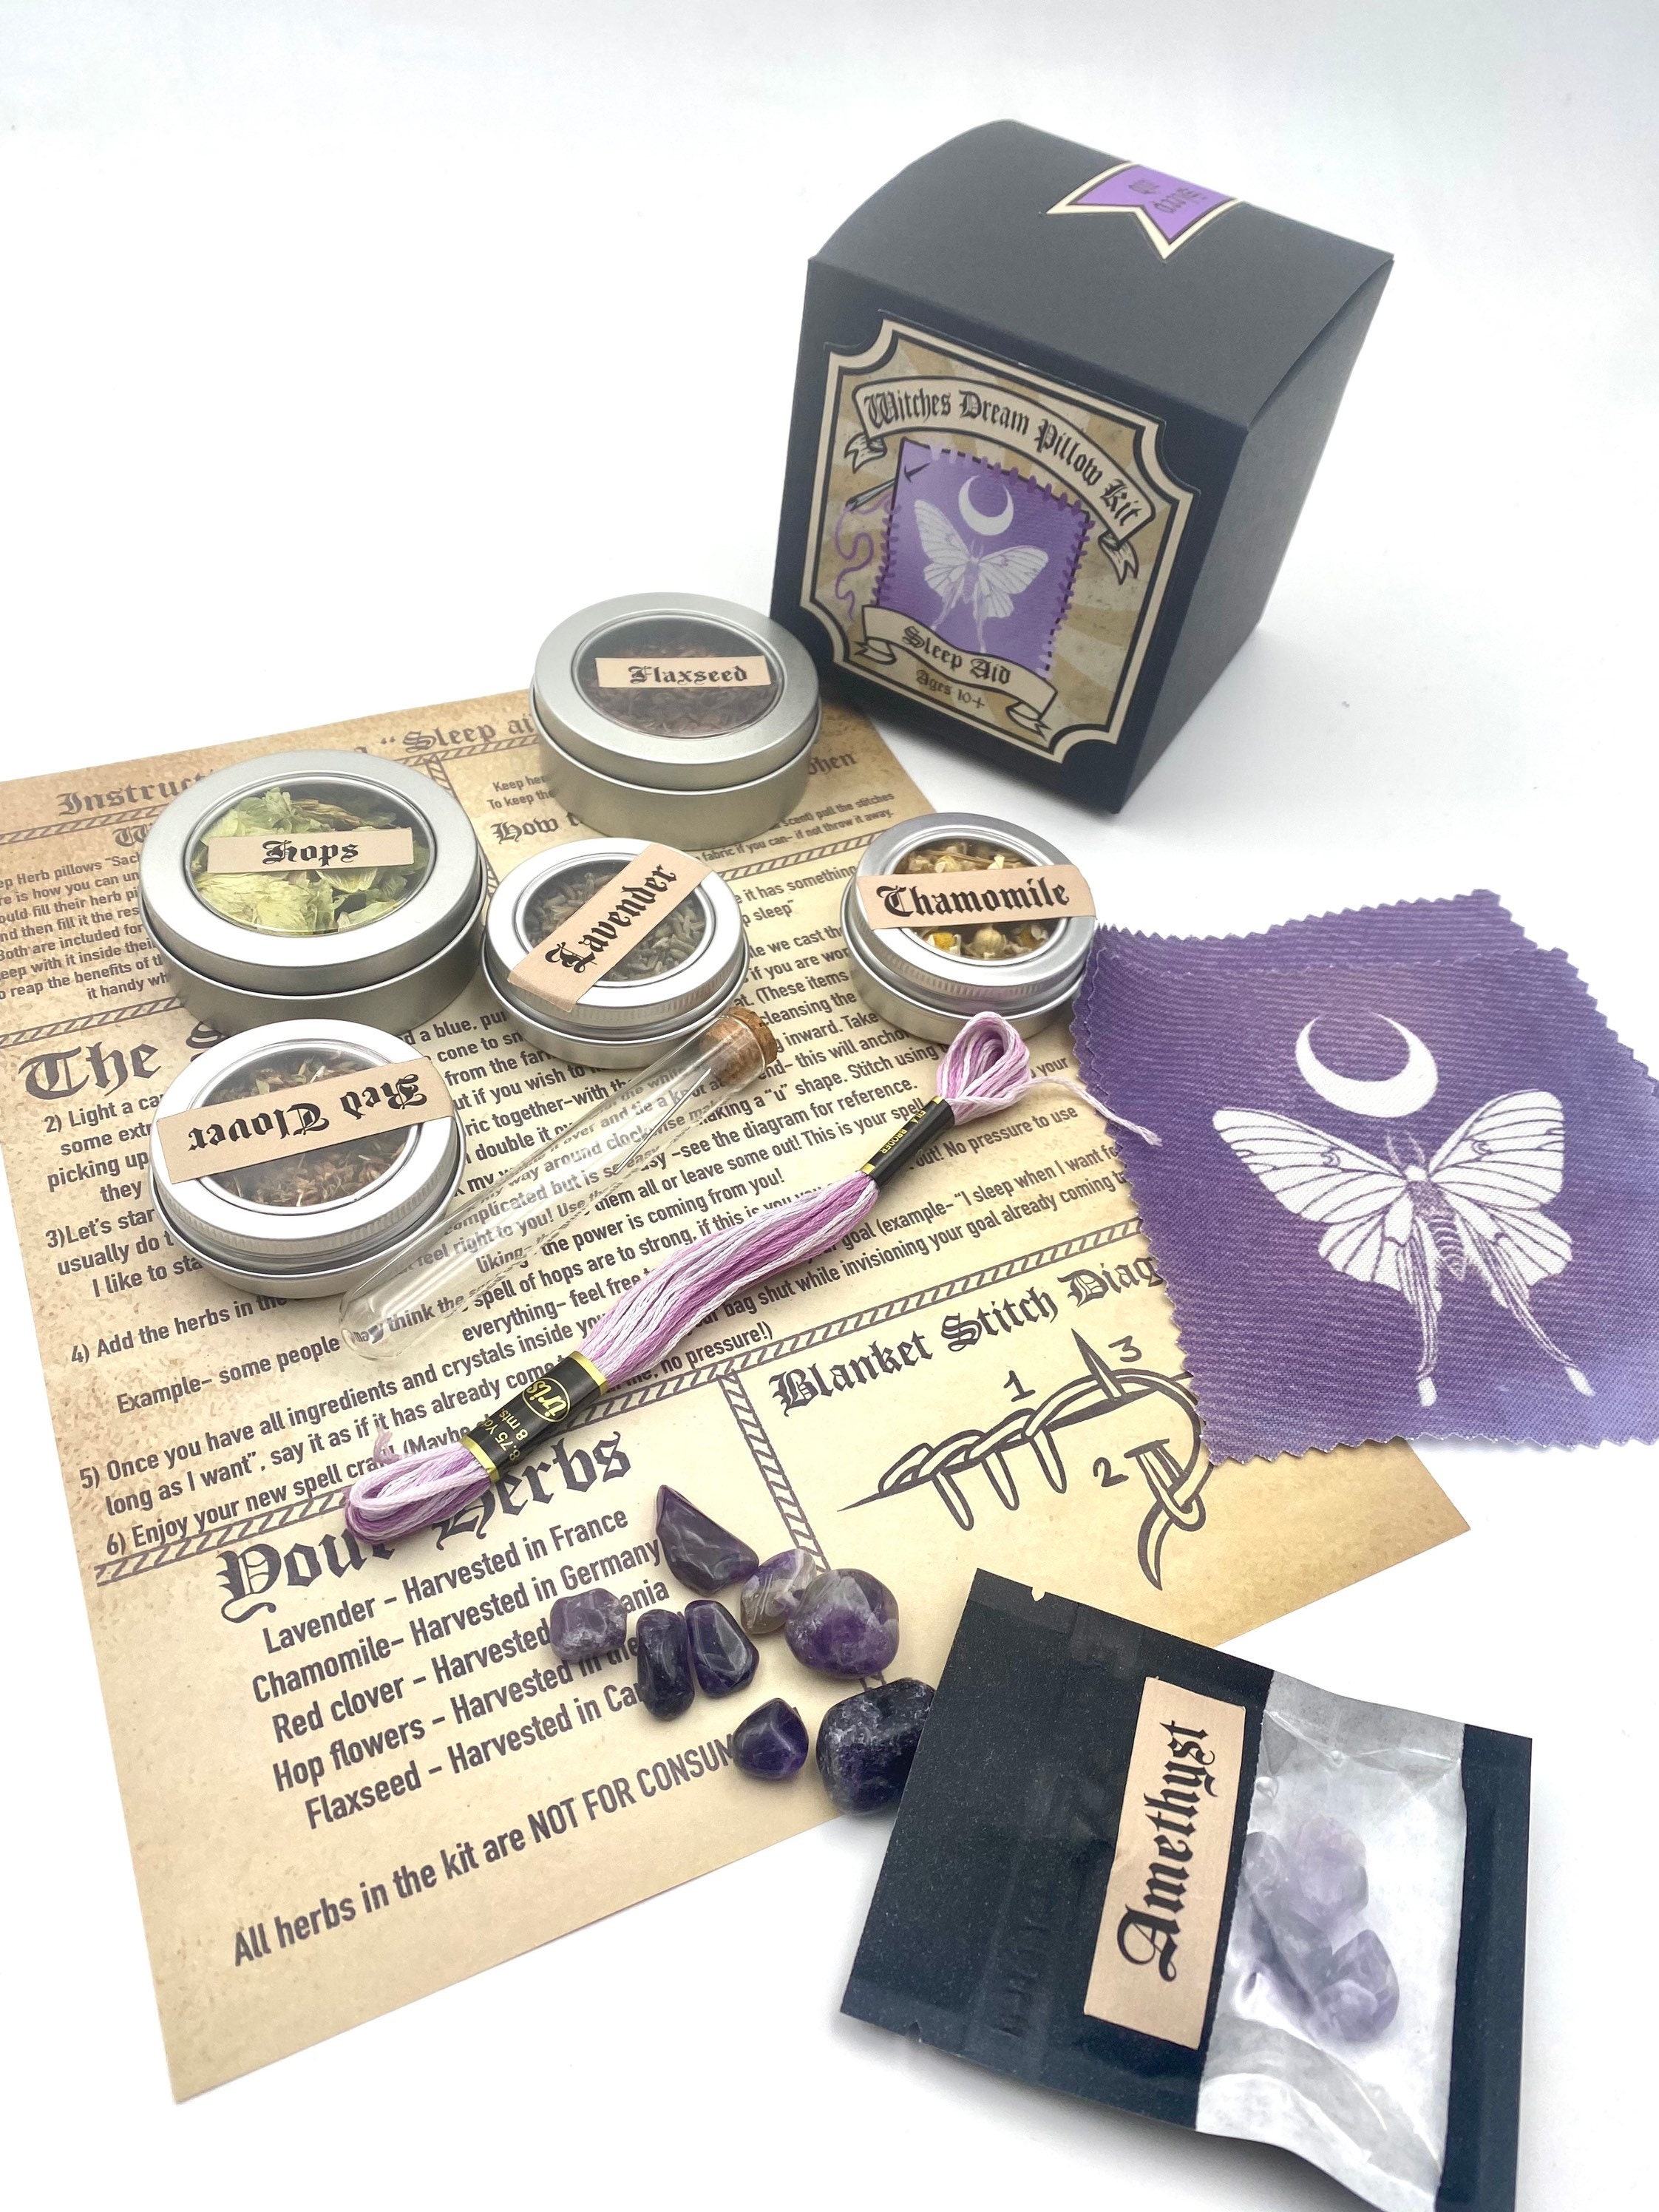 Witchcraft Herbs Kit, 50 Herbs for Witchcraft Box, India